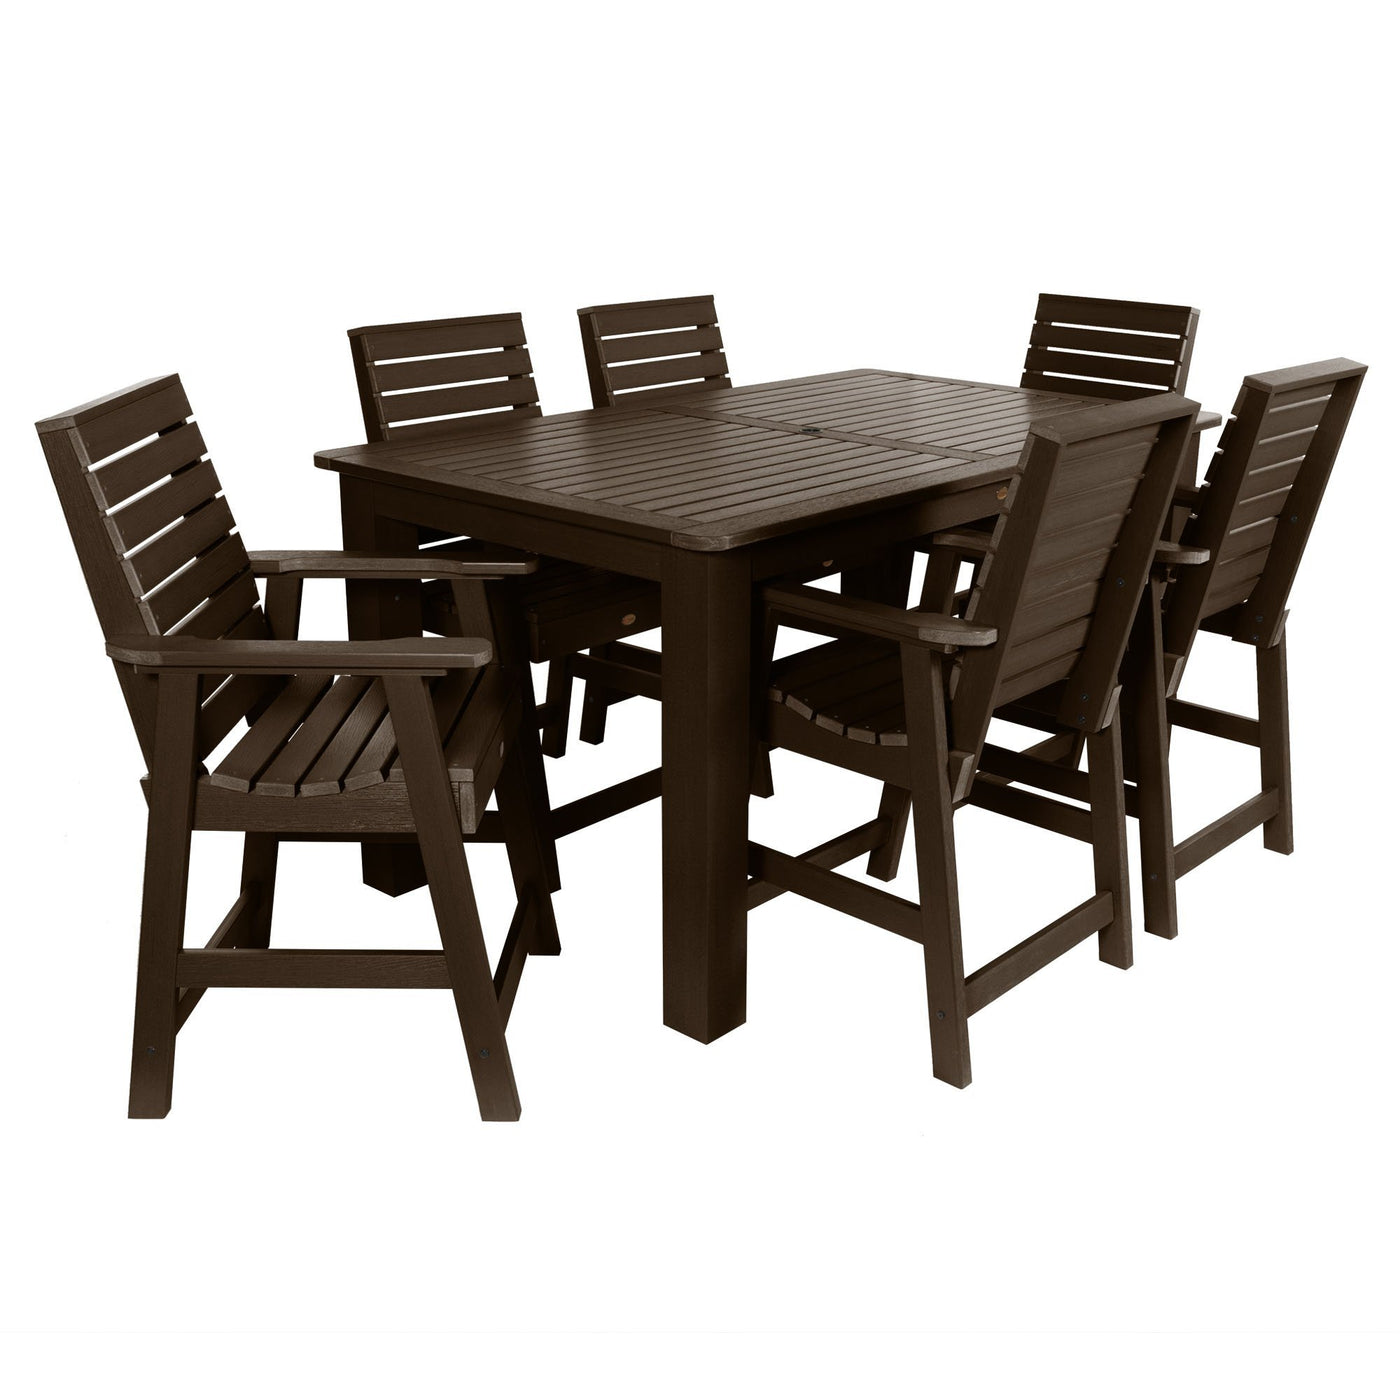 Weatherly 7pc Rectangular Dining Set 42in x 72in - Counter Height Dining Highwood USA Weathered Acorn 